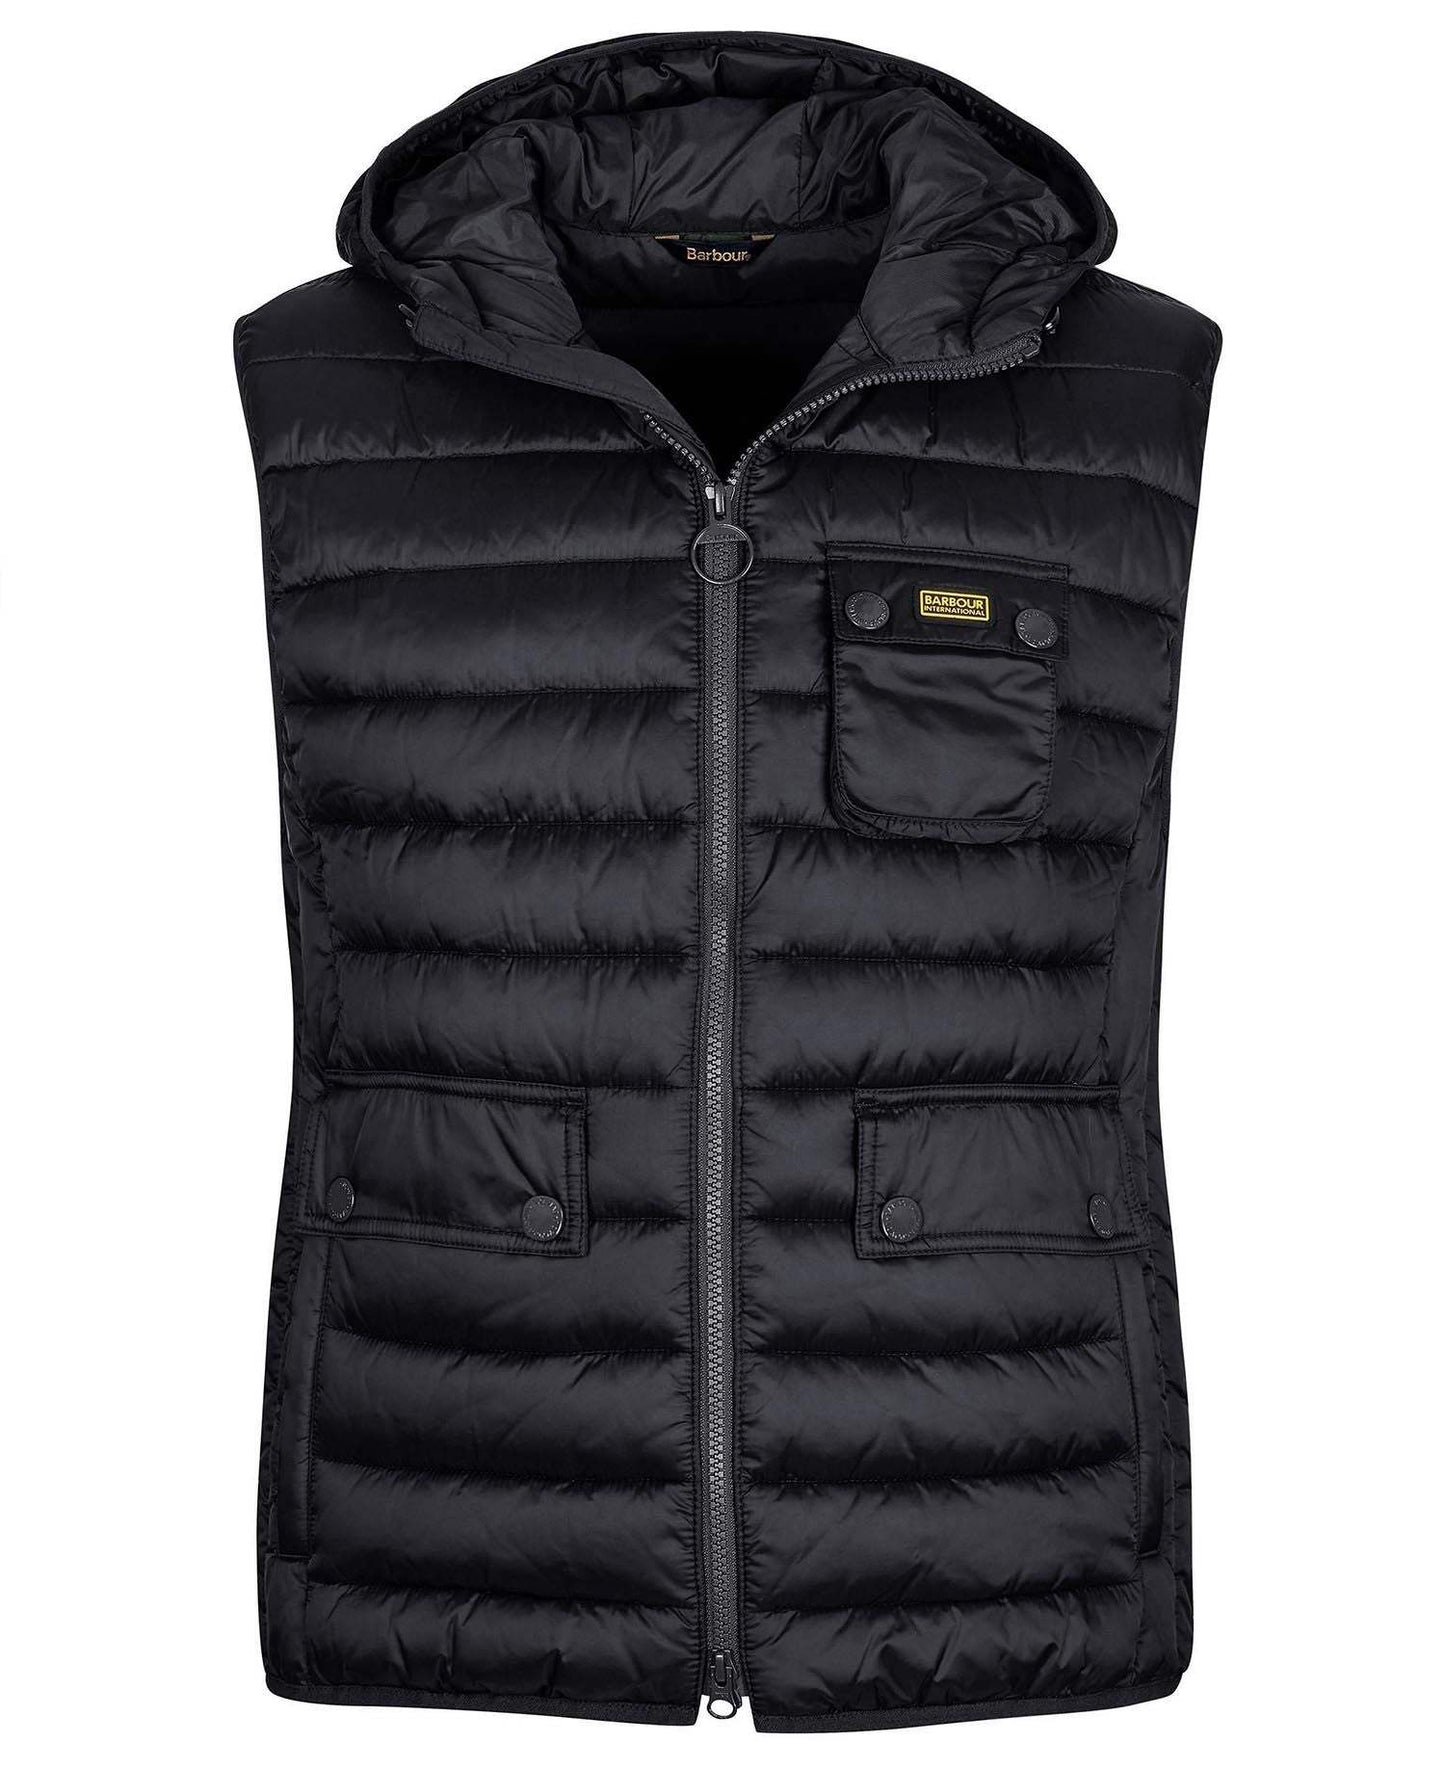 Barbour Ousten Hooded Gilet - The Luxury Promotional Gifts Company Limited